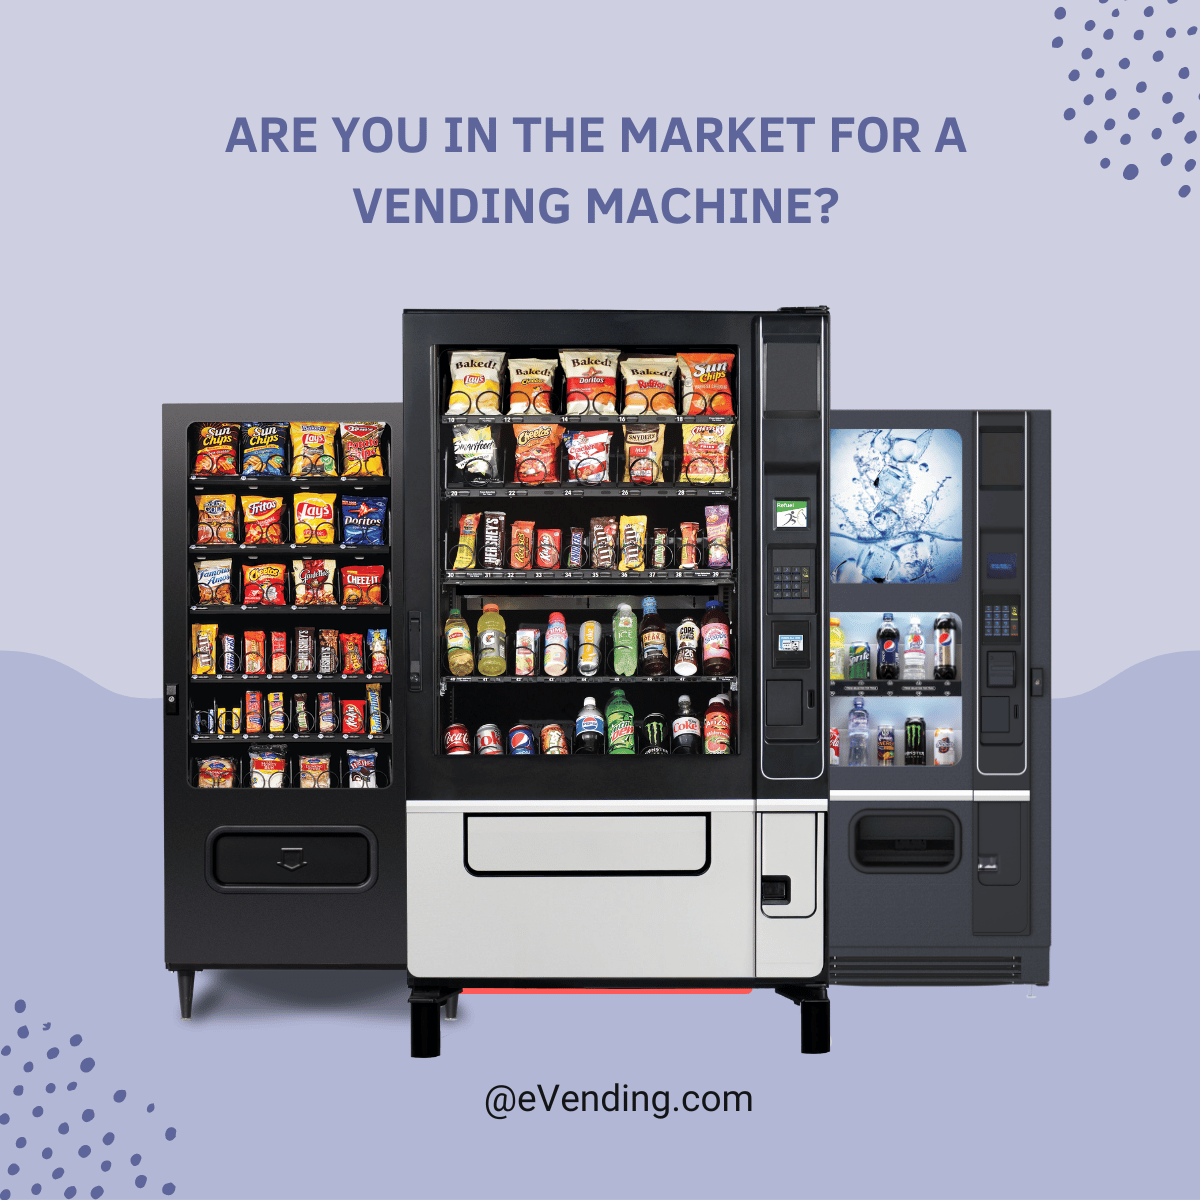 ARE YOU IN THE MARKET FOR A VENDING MACHINE?